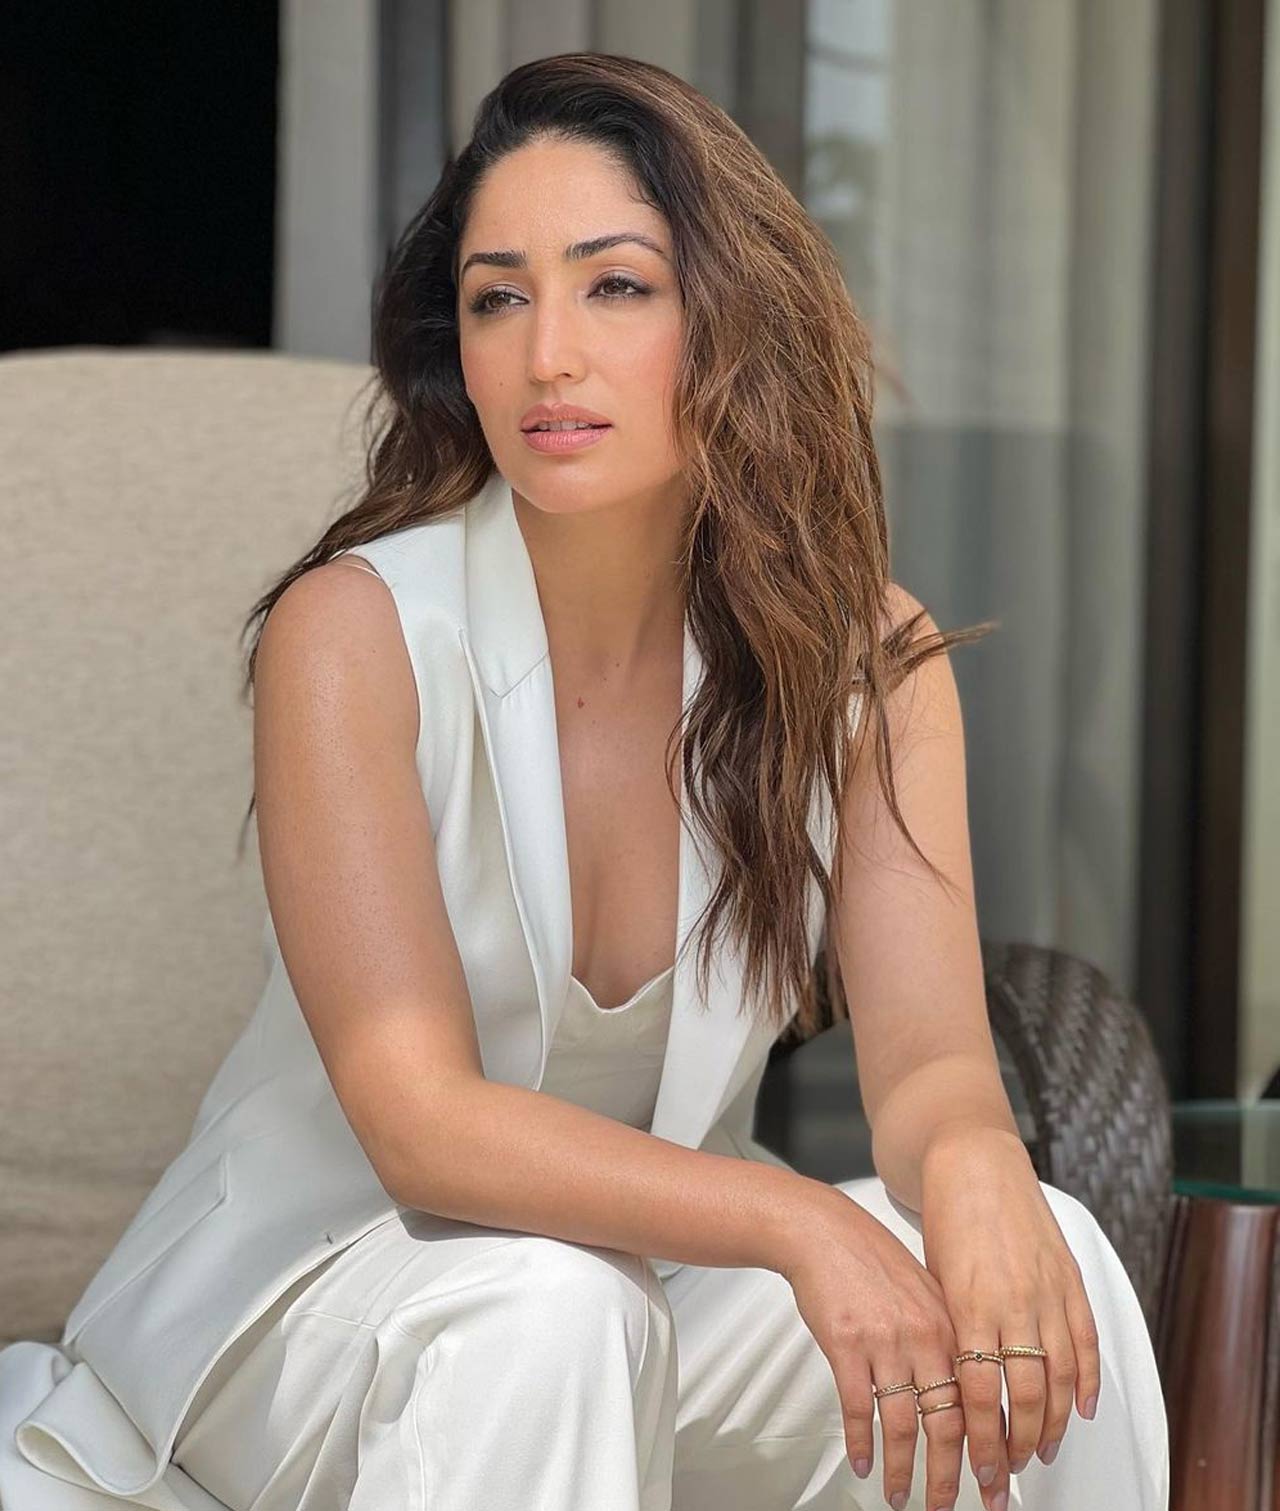 Yami Gautam too started her career with TV shows. She featured in Chaand ke Paar Chalo, CID and many more. The actress made her debut along with Ayushmann Khurana in 2012